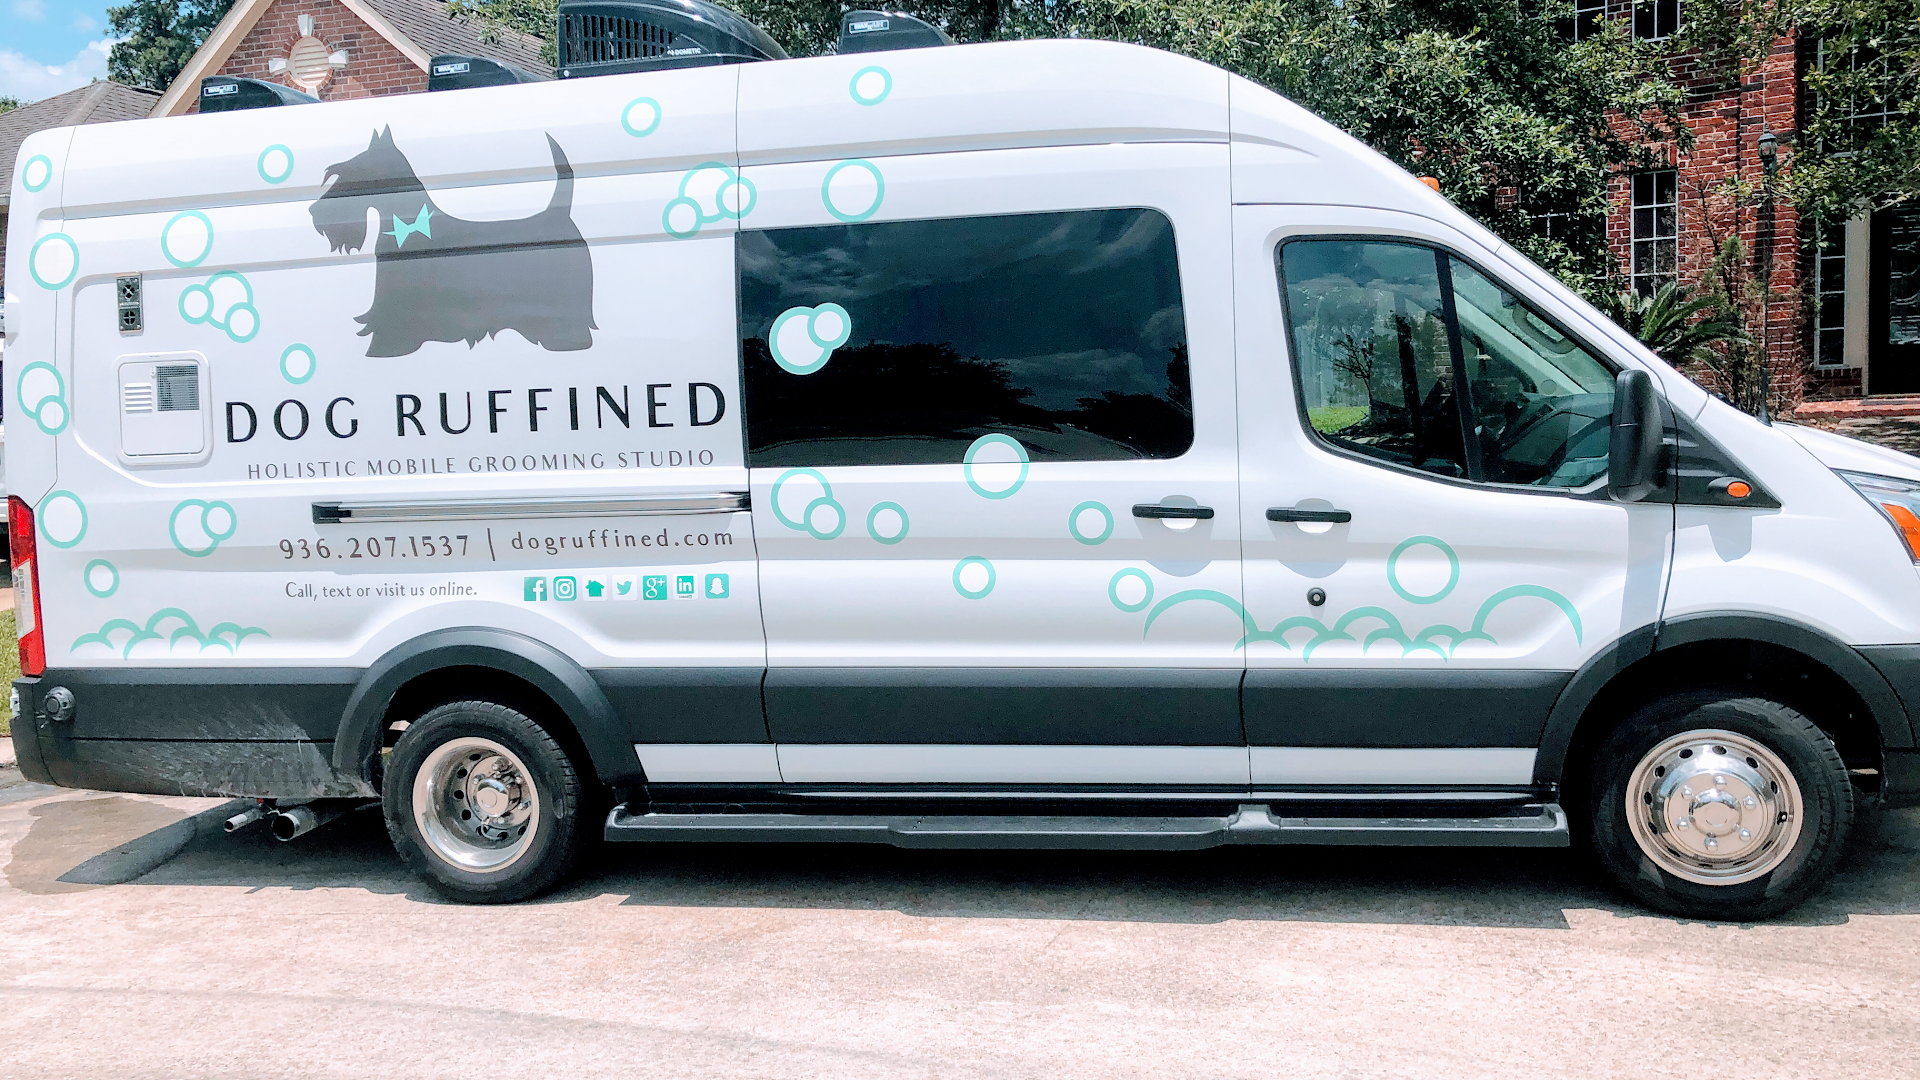 Dog Ruffined Mobile Grooming